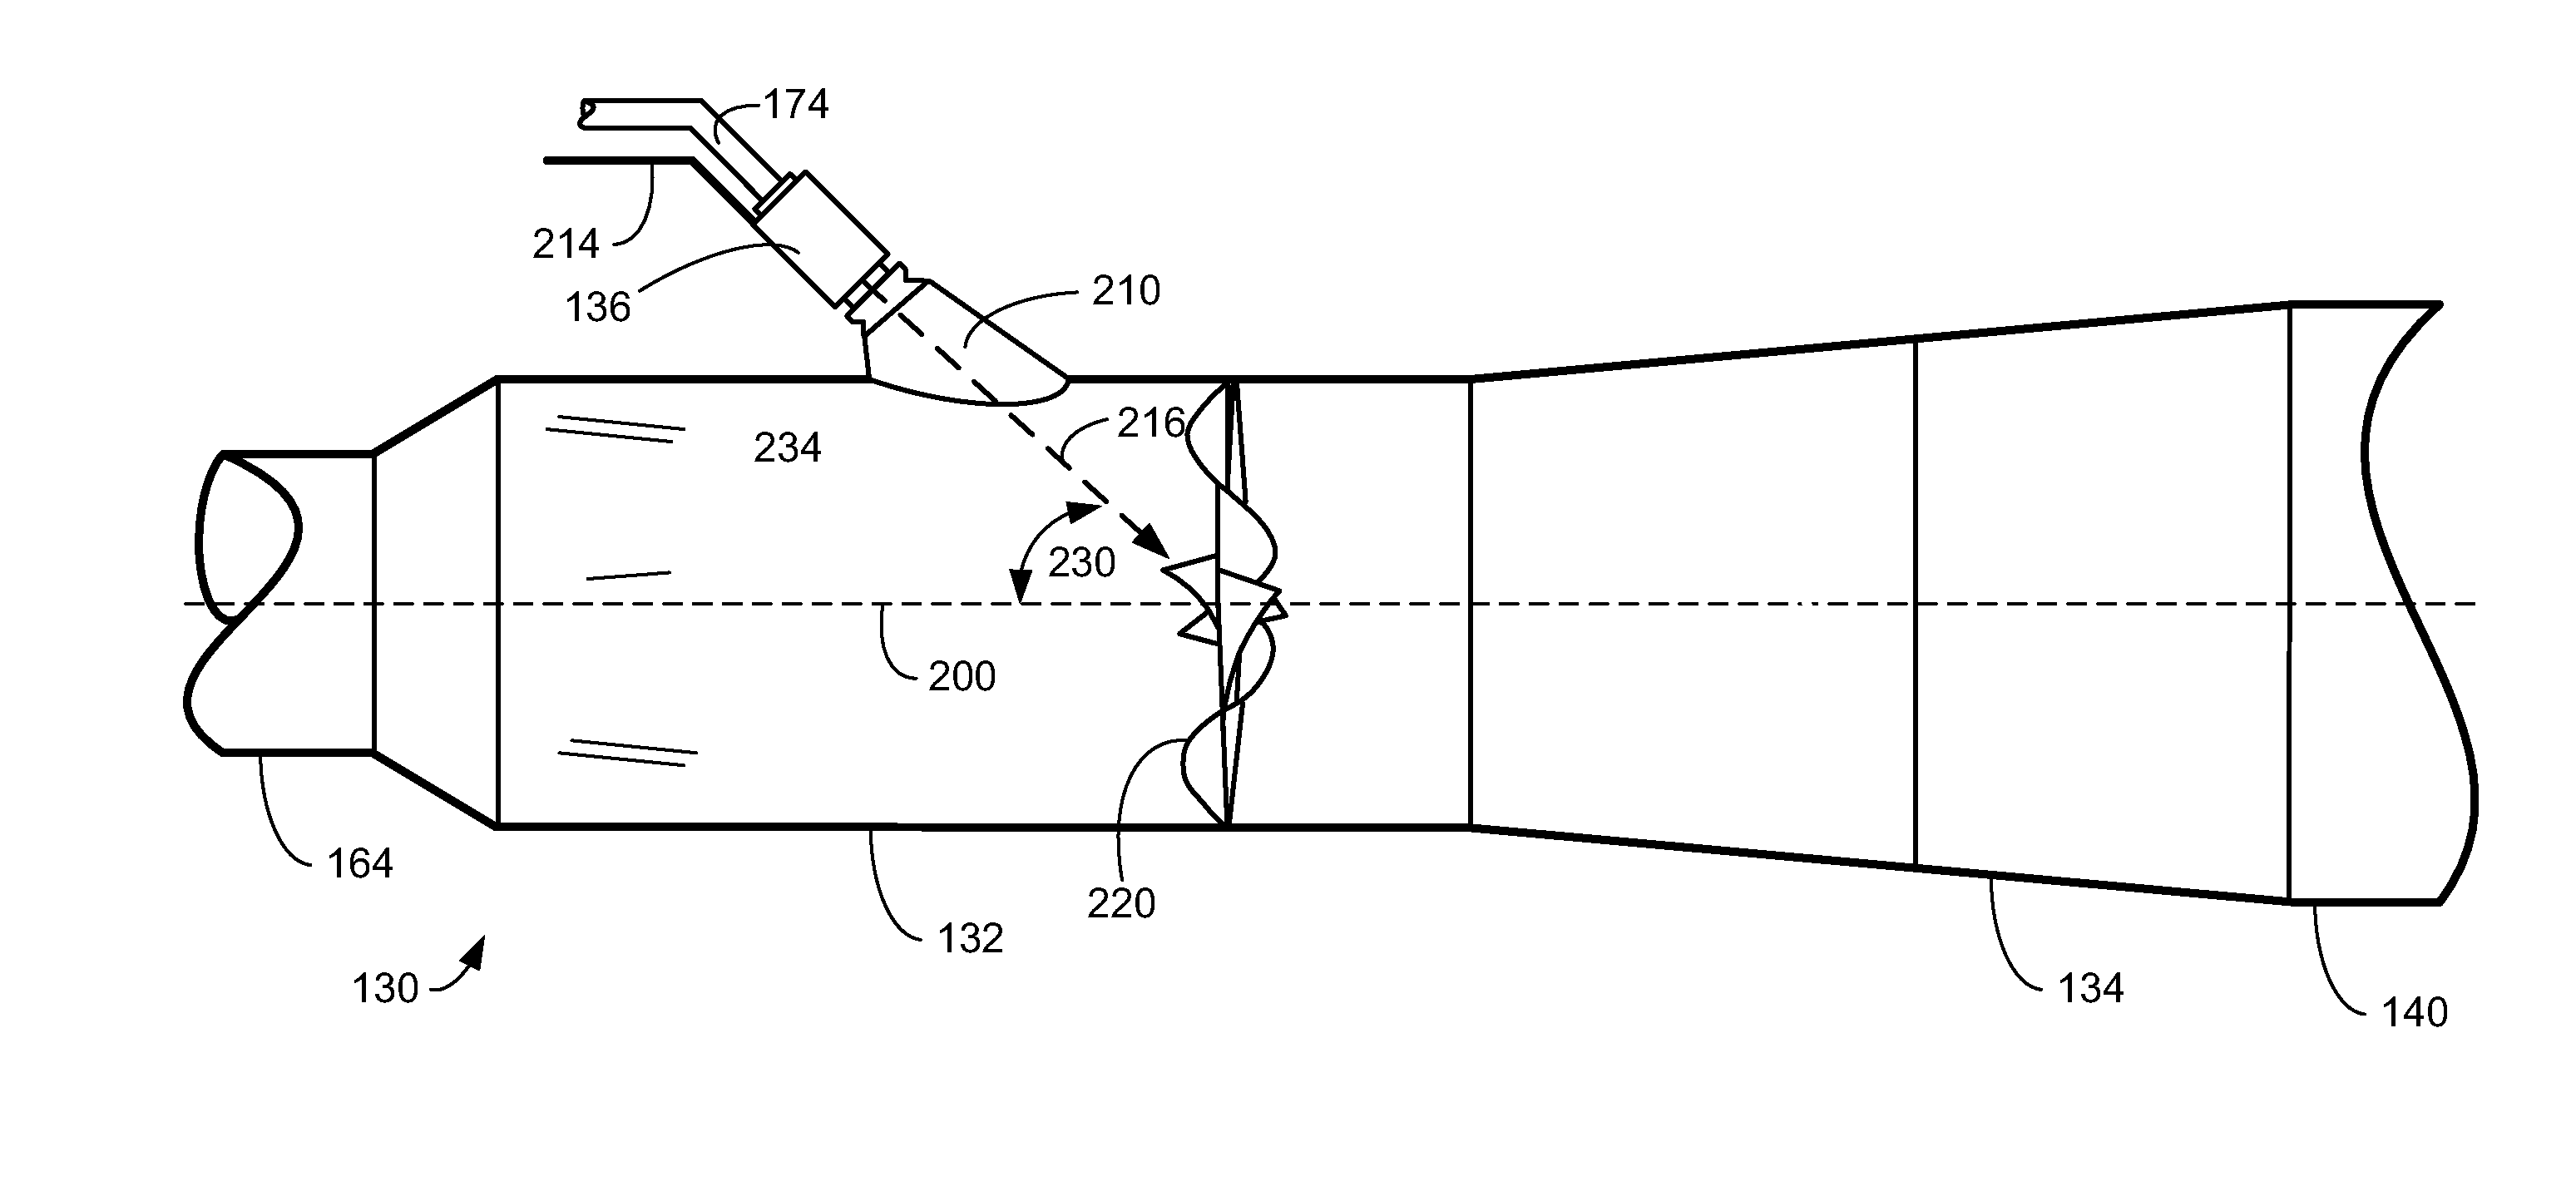 Exhaust system mixing device